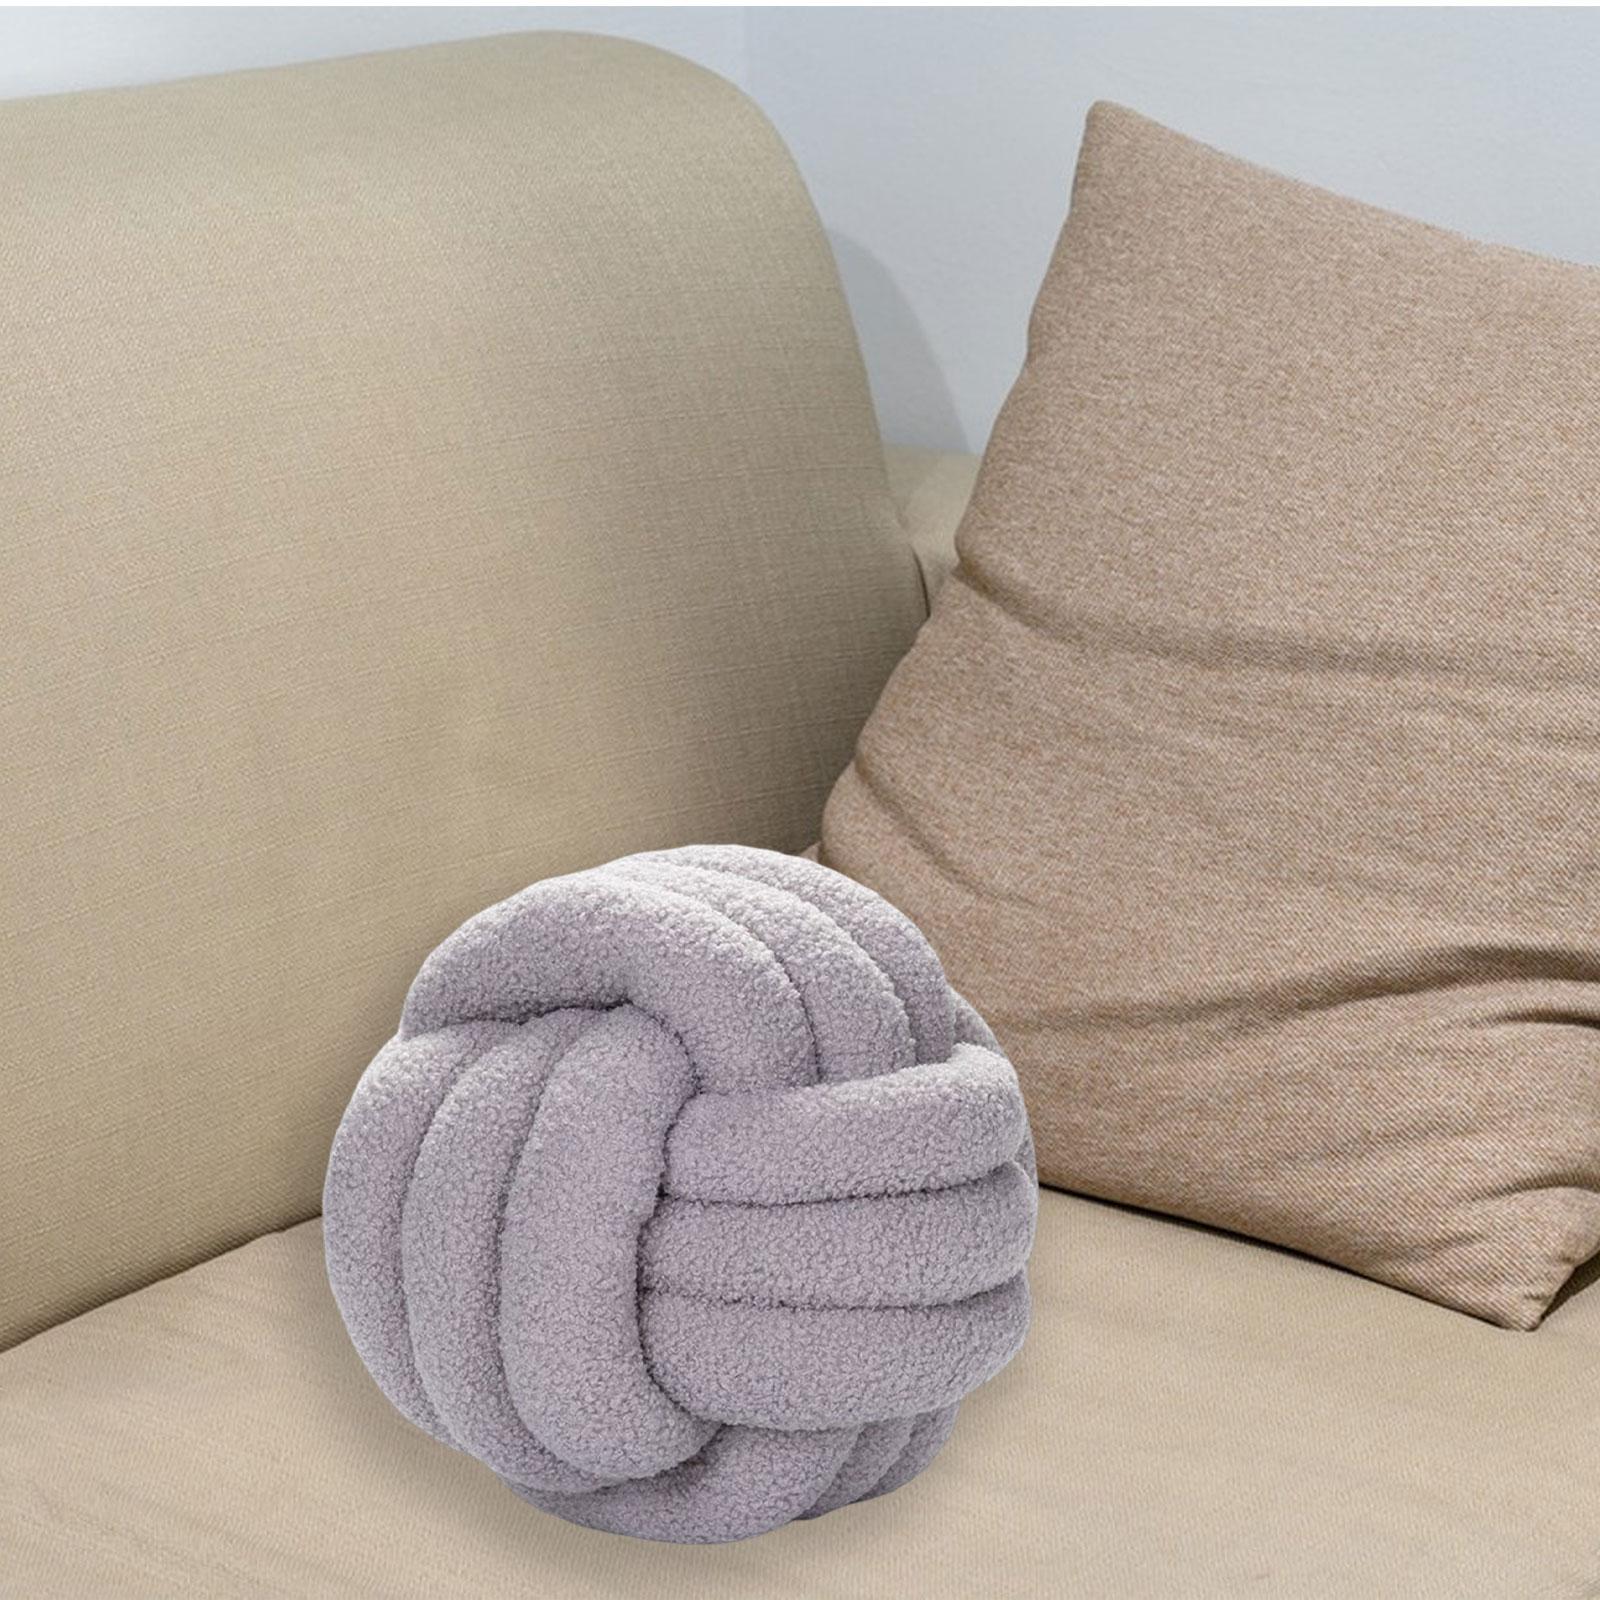 Plush Knot Ball Pillow Diameter 22cm Room Decoration for sofa Couch Grey